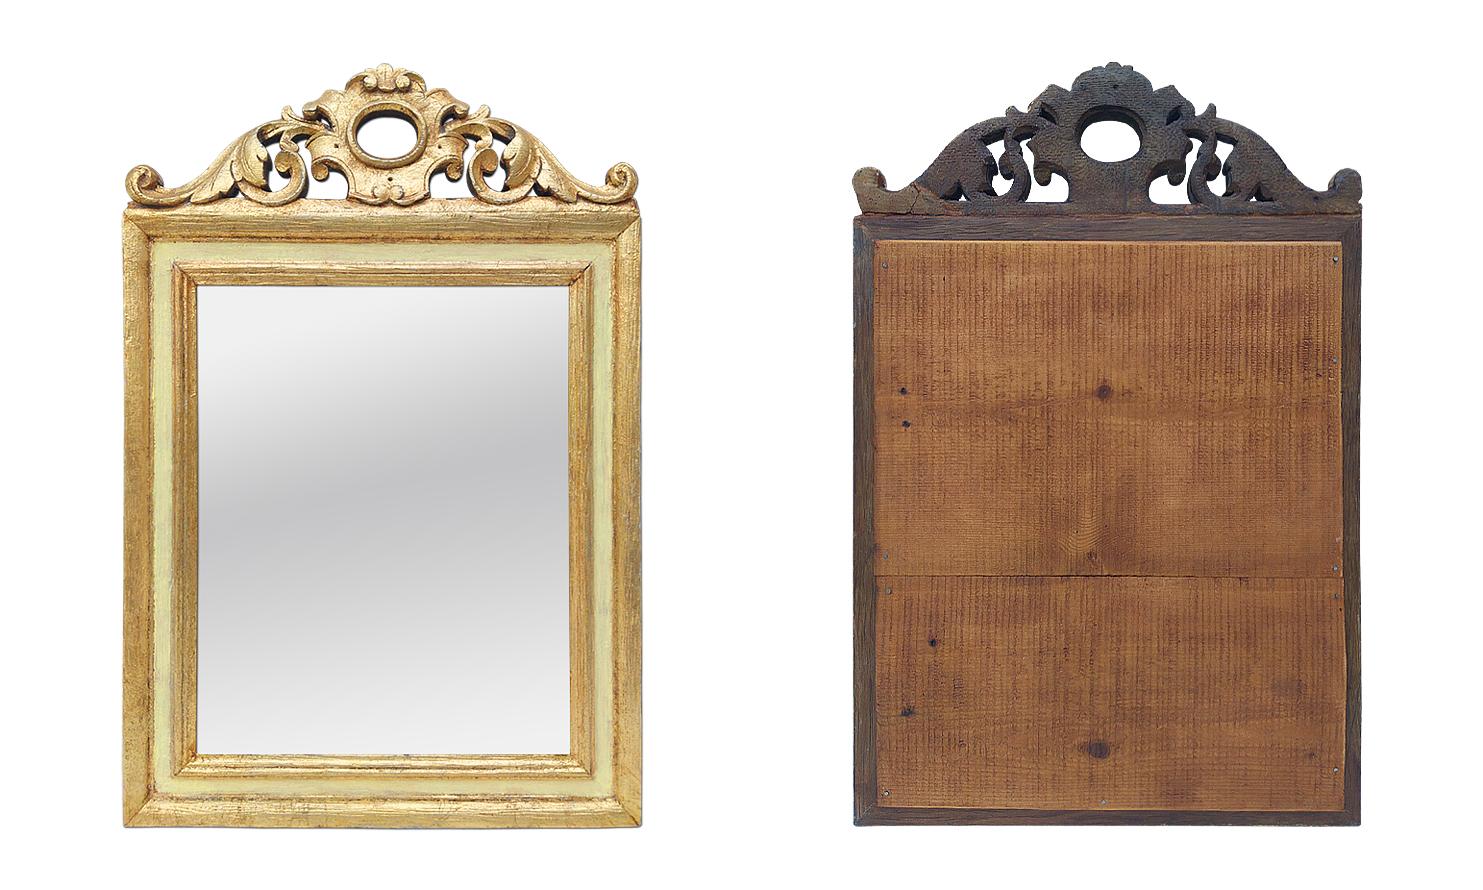 Mid-20th Century Antique Giltwood Mirror, French Provincial Style, circa 1935 For Sale